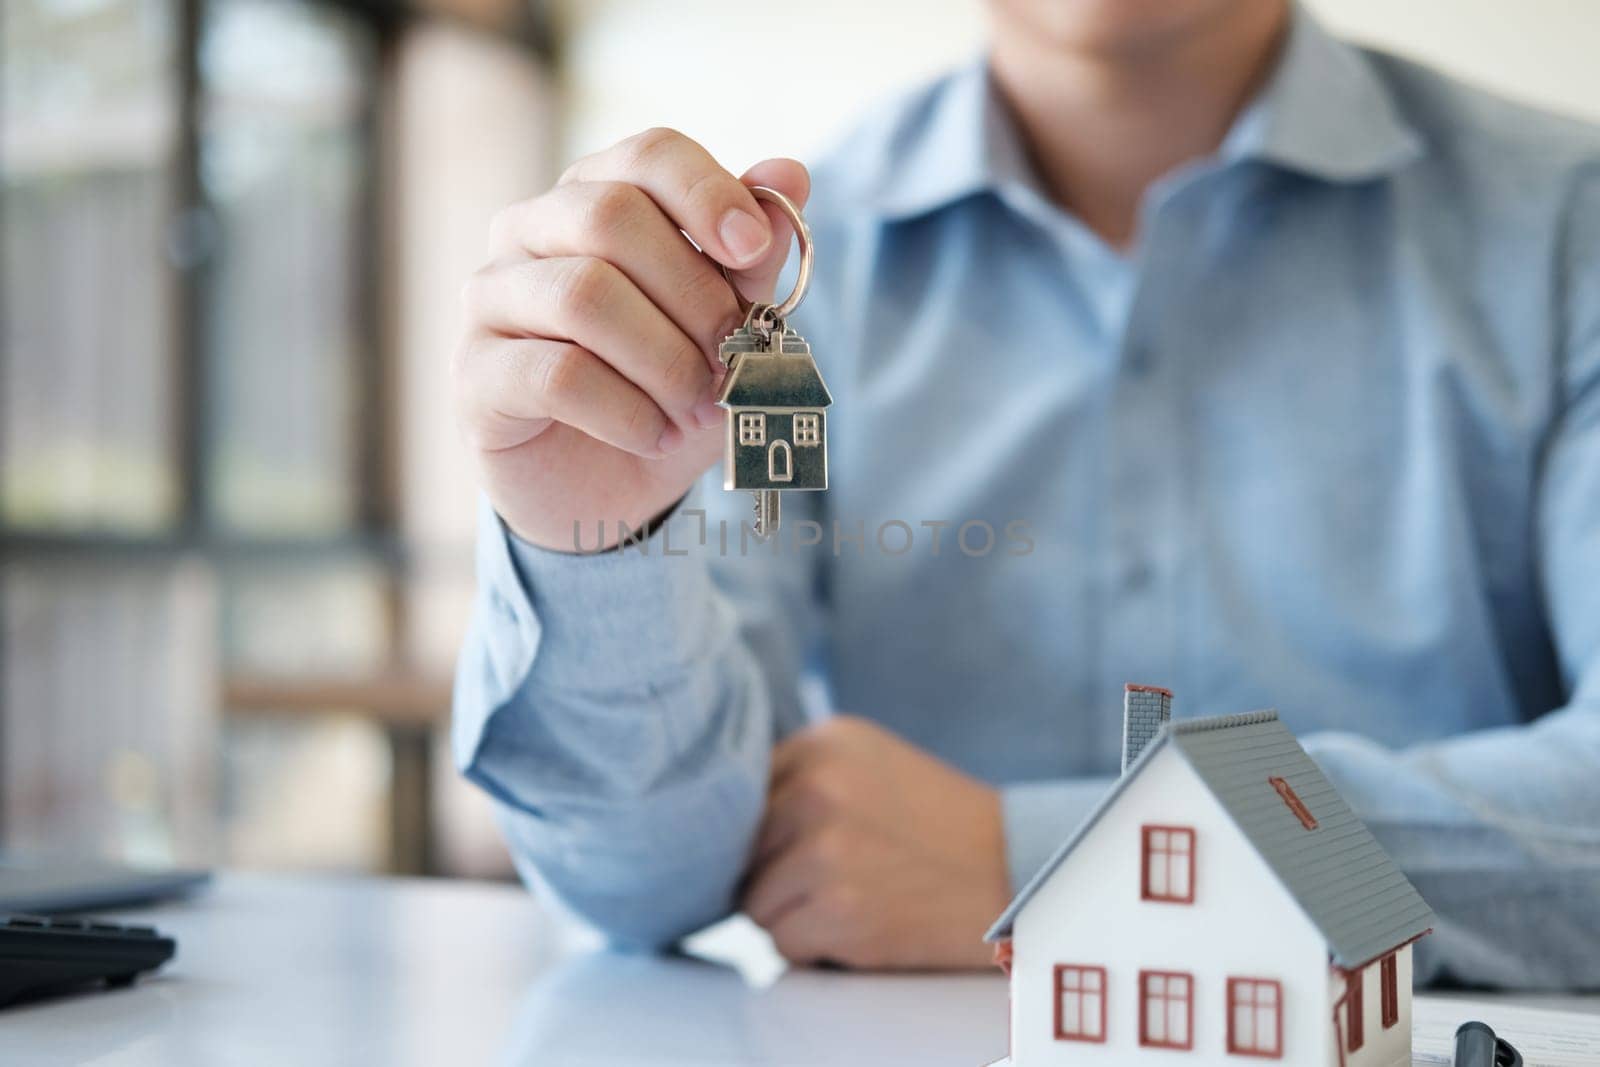 The real estate agent hands the keys to the customer. Real estate investment loans by ijeab